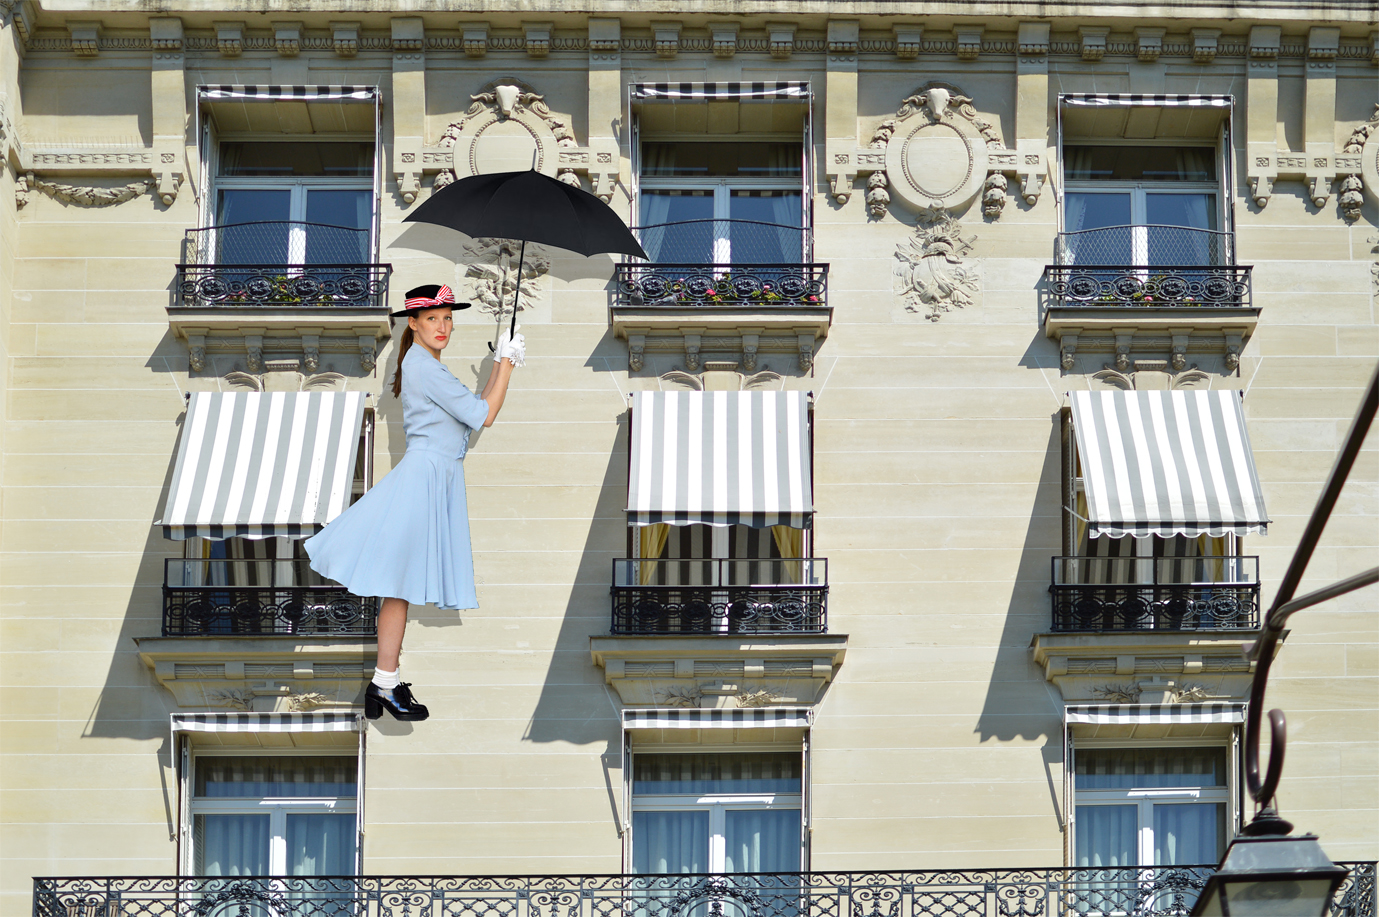 marry poppins style